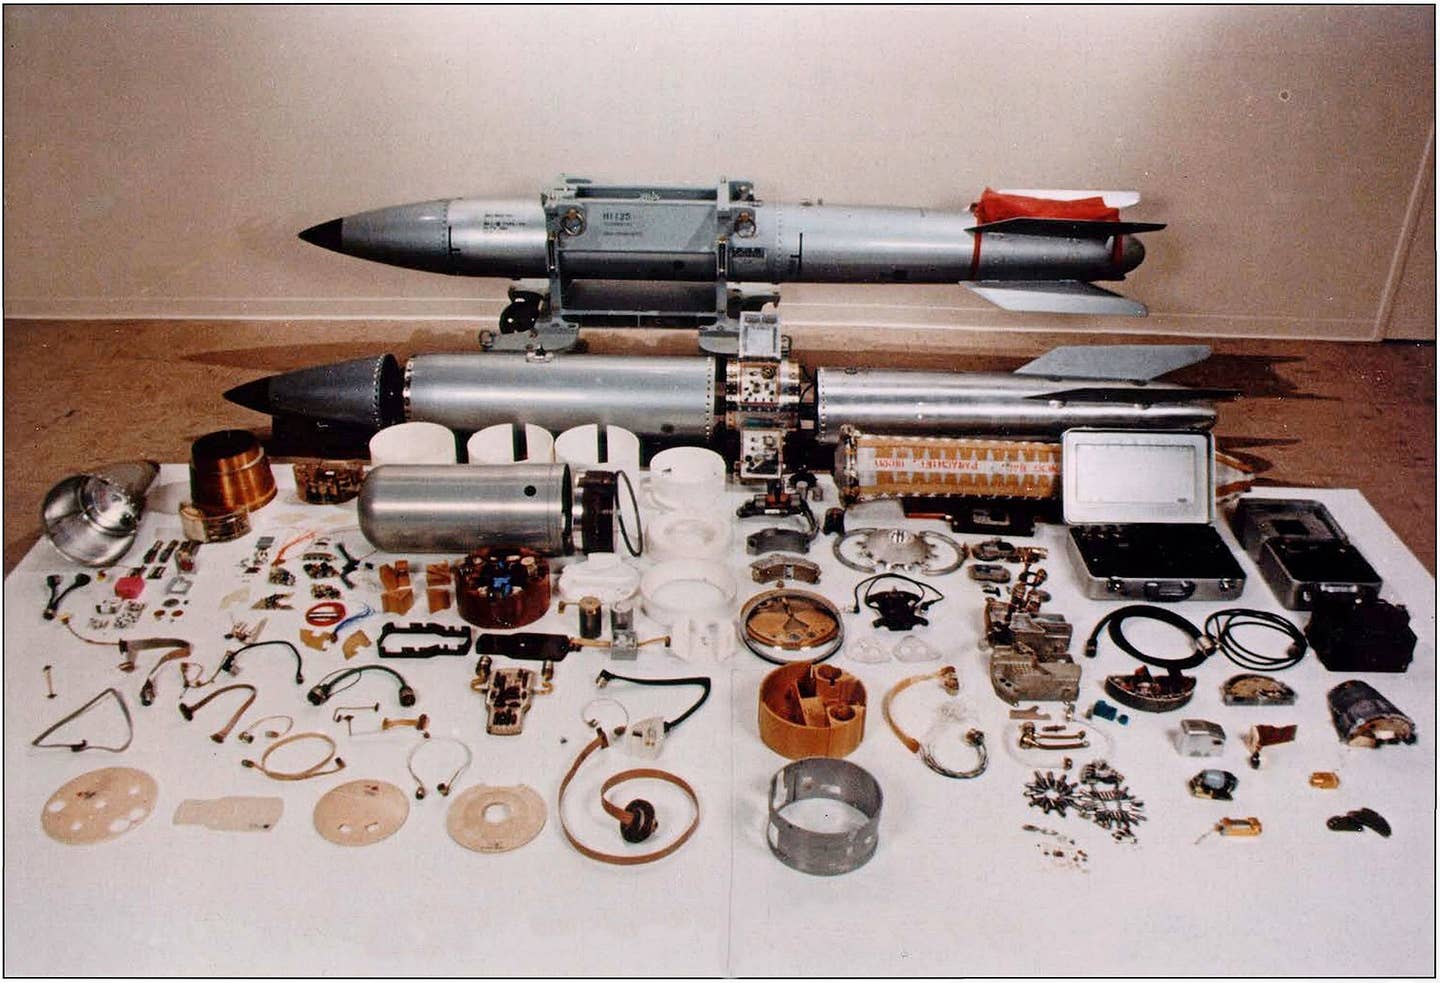 An assembled (background) and disassembled (foreground) B61.